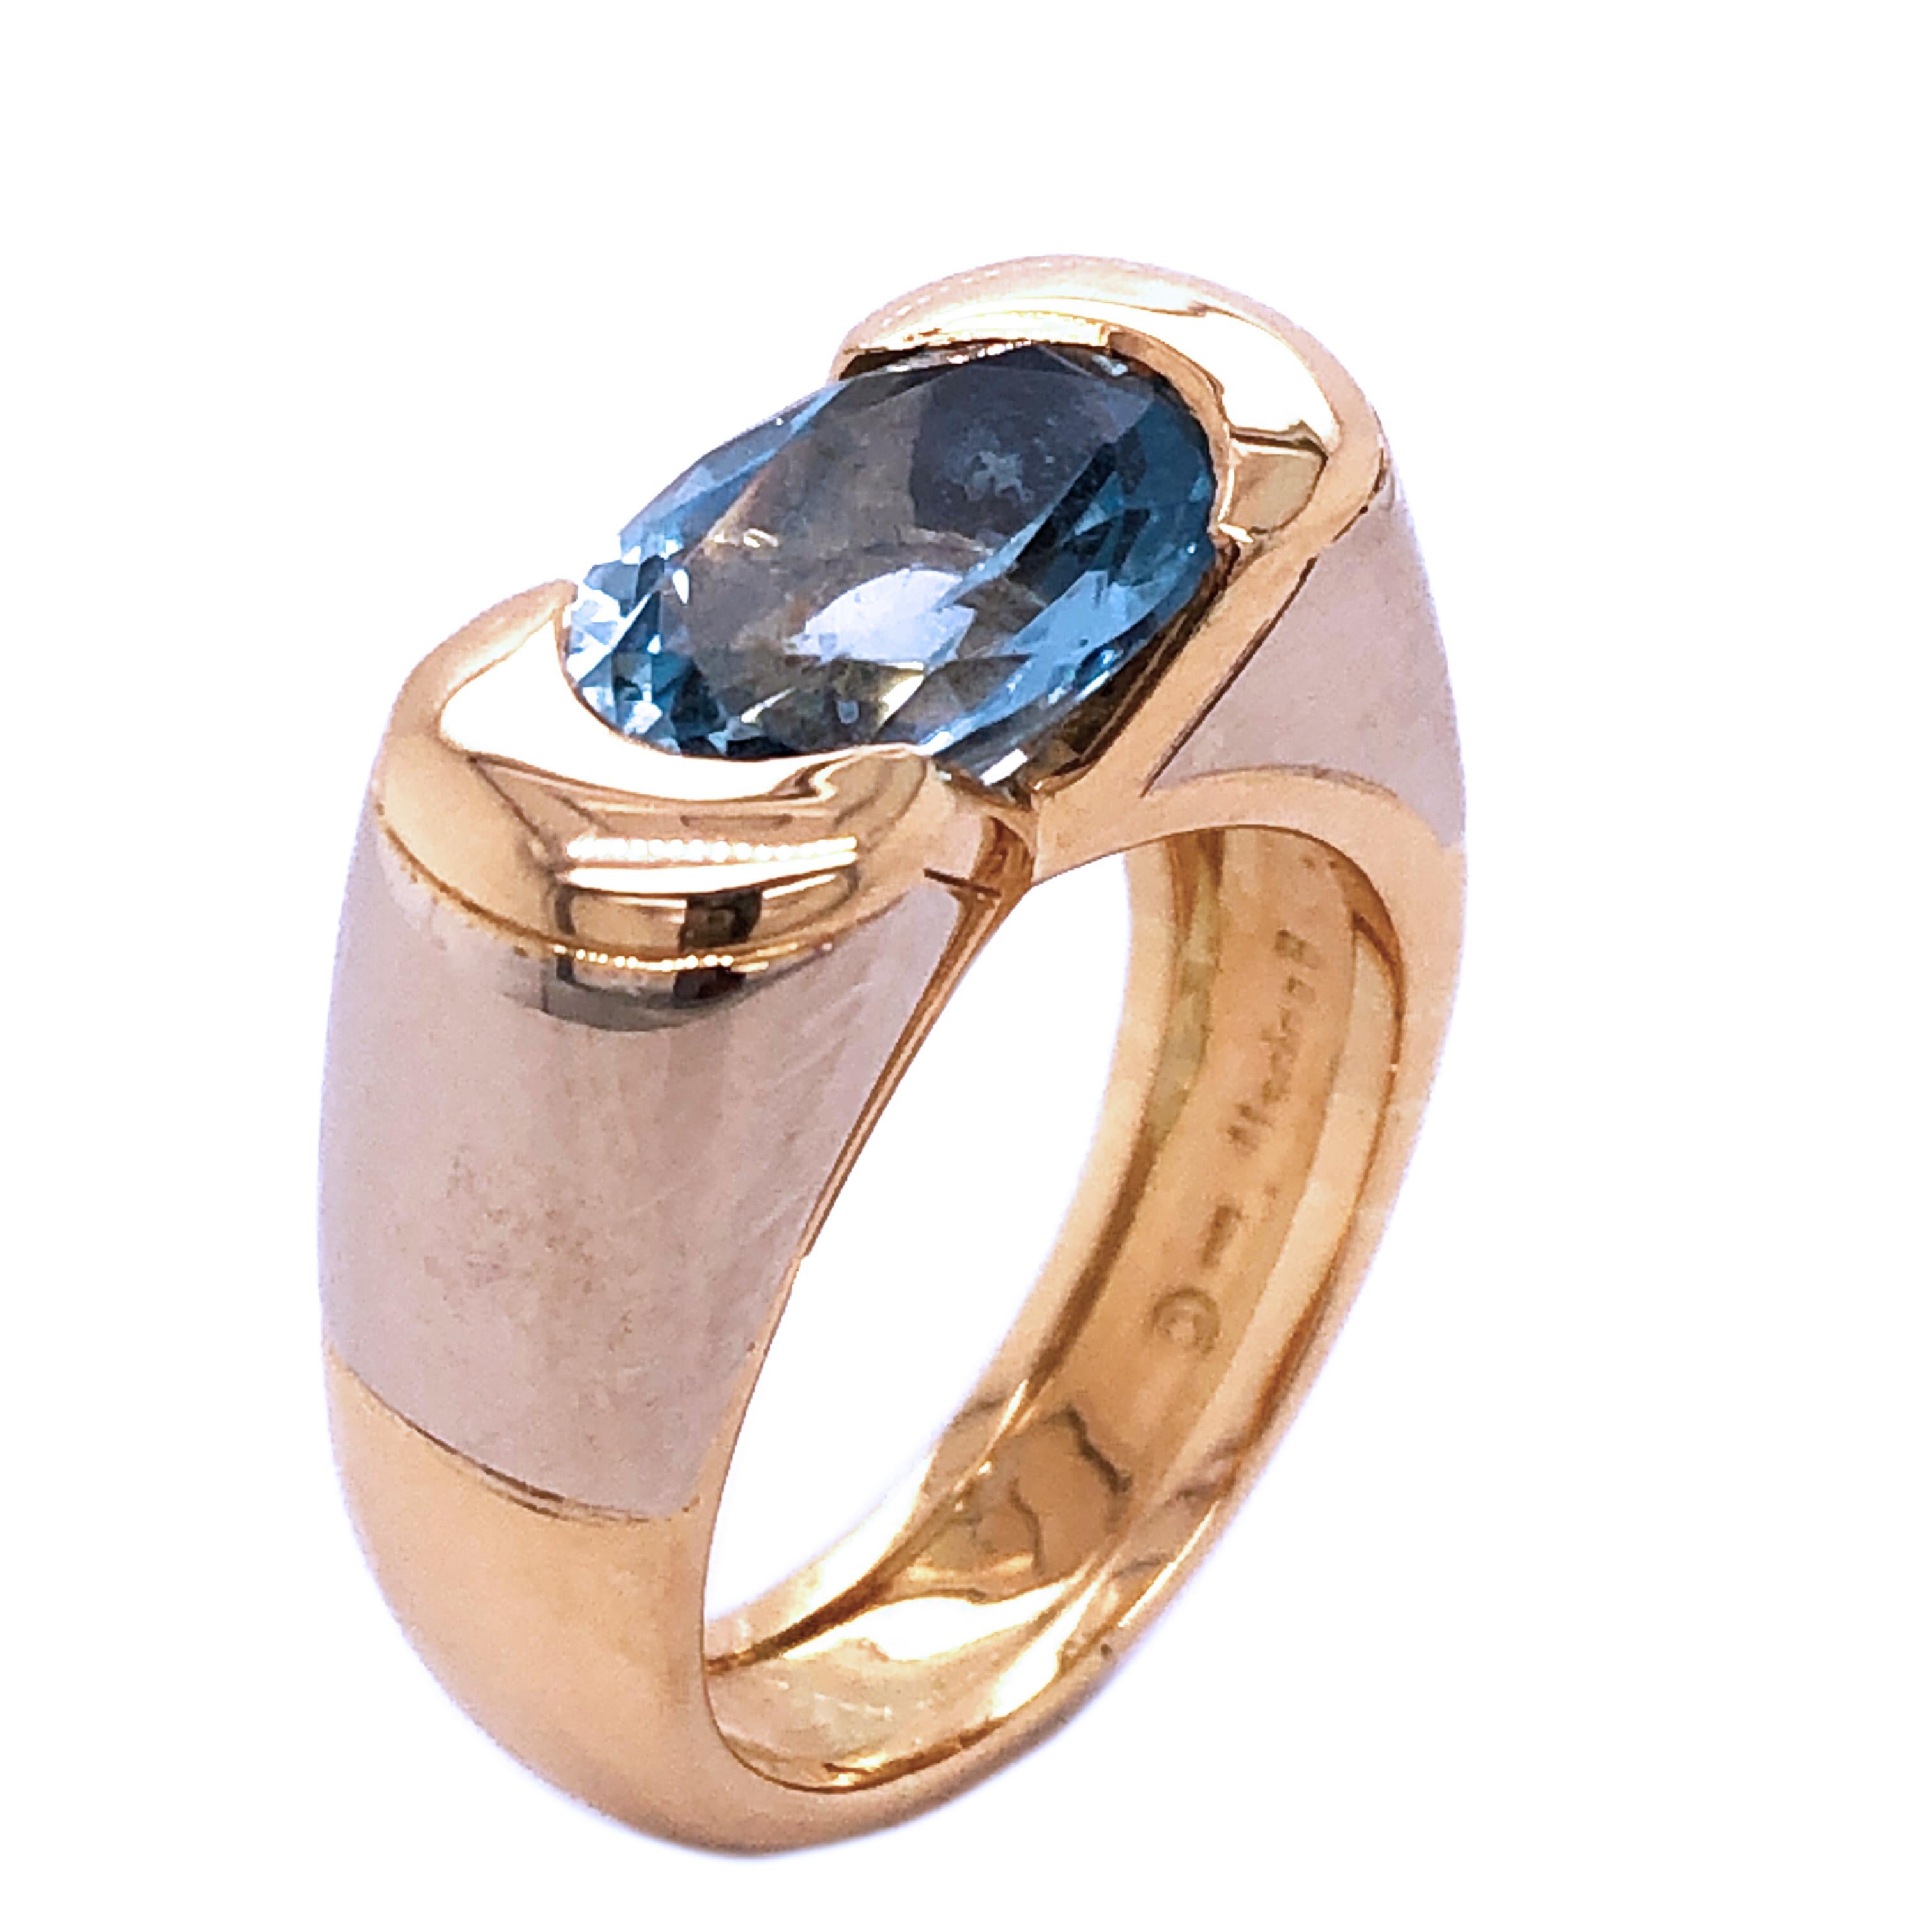 One-of-a-kind 80's Marina B. Patrizia solitaire ring featuring a top quality 3.12Kt Oval Elongated Special Cut Santa Maria Aquamarine in a chic, yet timeless white and yellow gold setting. Ring Size 6 3/4, French Size 54. This piece comes from a